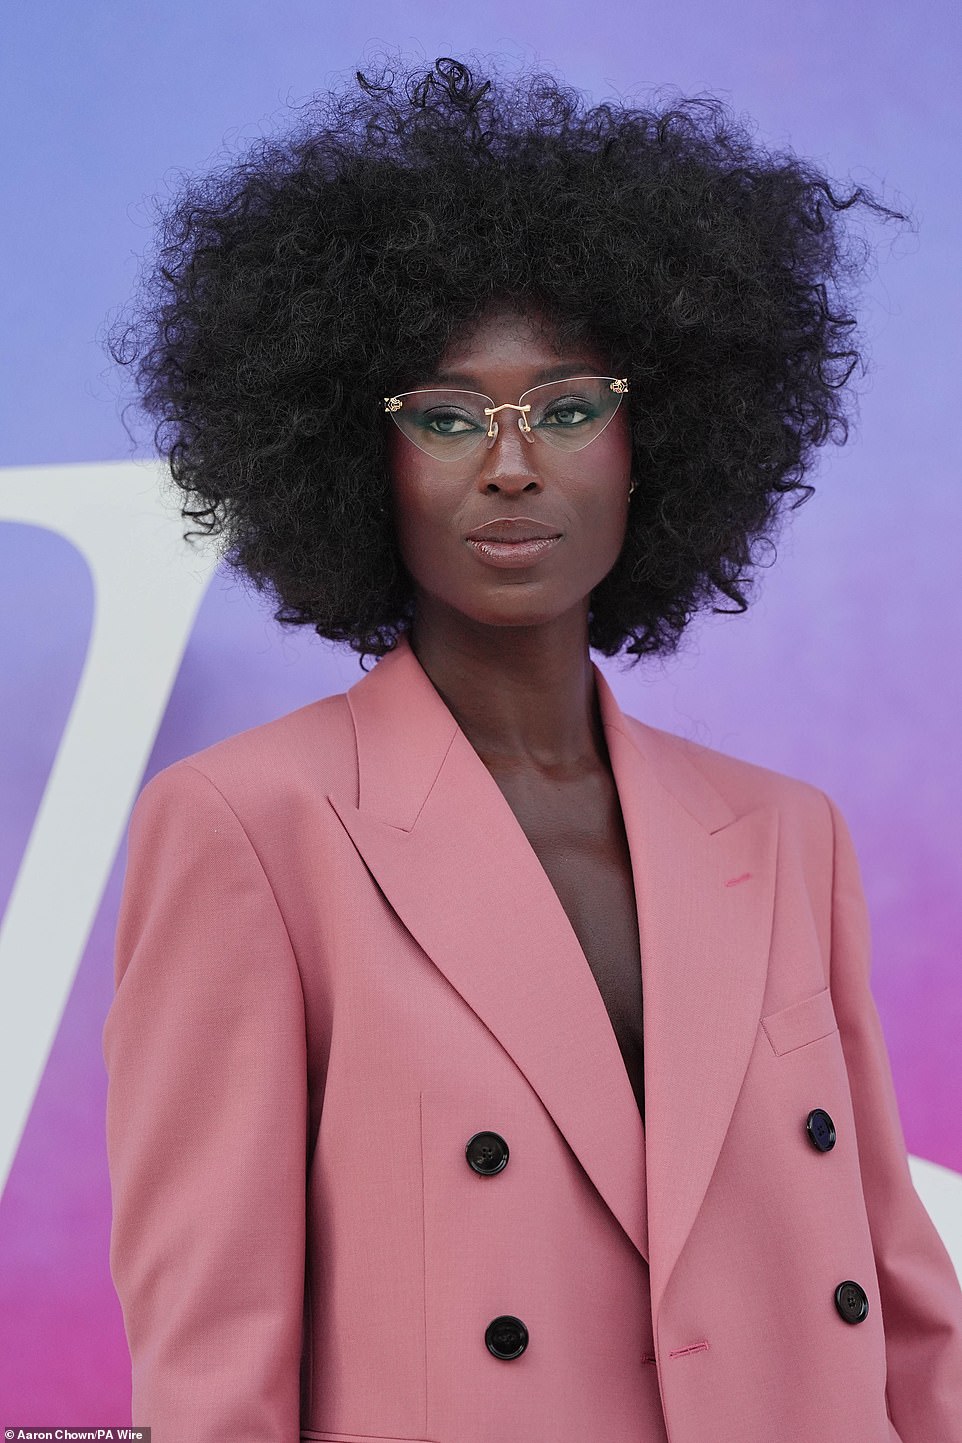 She wore her hair in a natural afro and sported a pair of quirky glasses